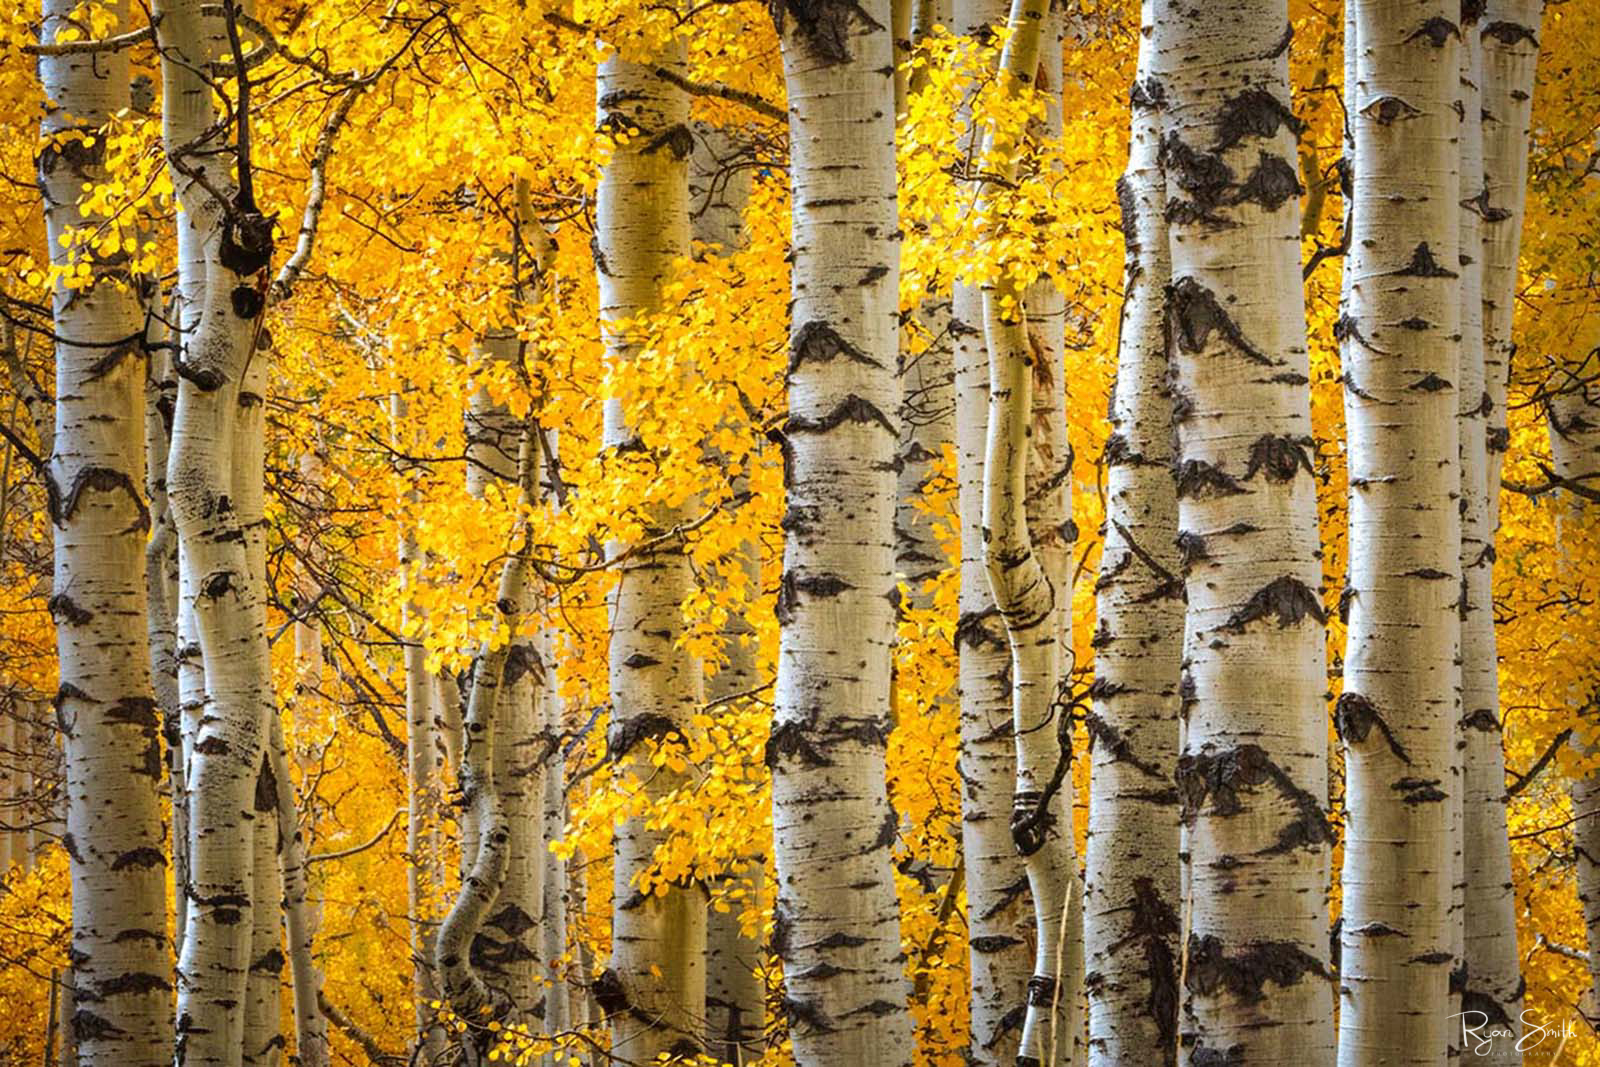 Bright yellow aspen trees and white tree trunks seen are seen up close with tan grasses on the forest floor in a horizontal art print.